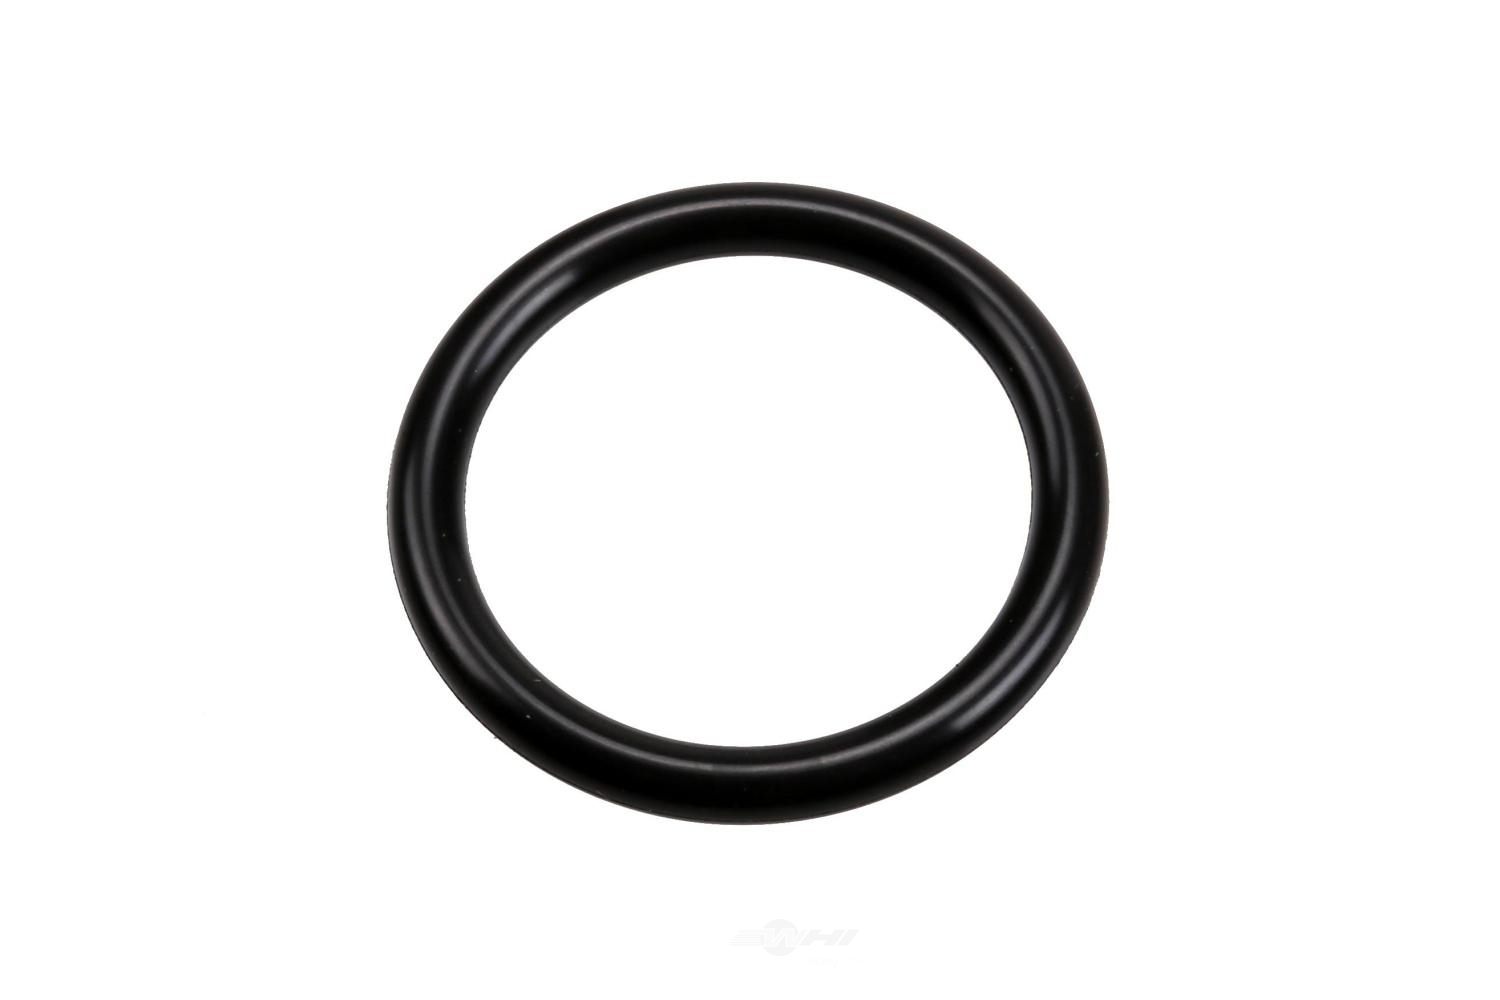 GM GENUINE PARTS - Engine Oil Cooler Seal - GMP 94399279